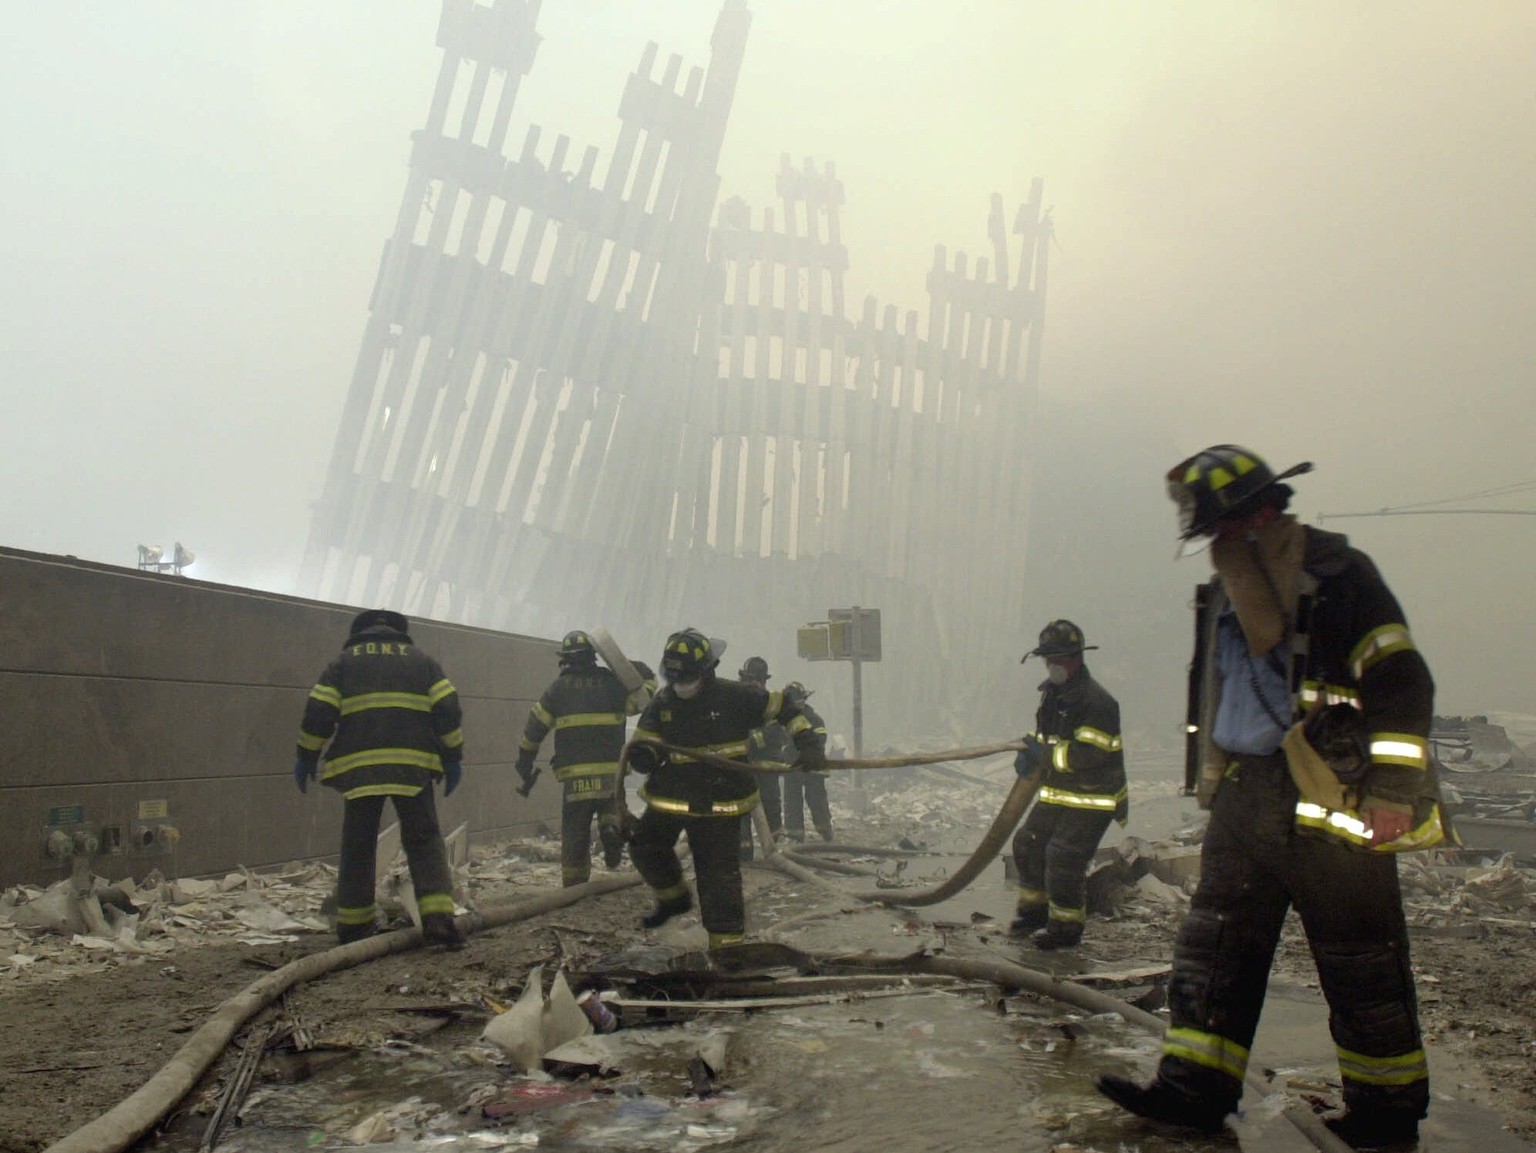 ARCHIV: With the skeleton of the World Trade Center twin towers in the background, New York City firefighters work amid debris on Cortlandt St. after the terrorist attacks (11.09.01). (zu dapd-Text) F ...